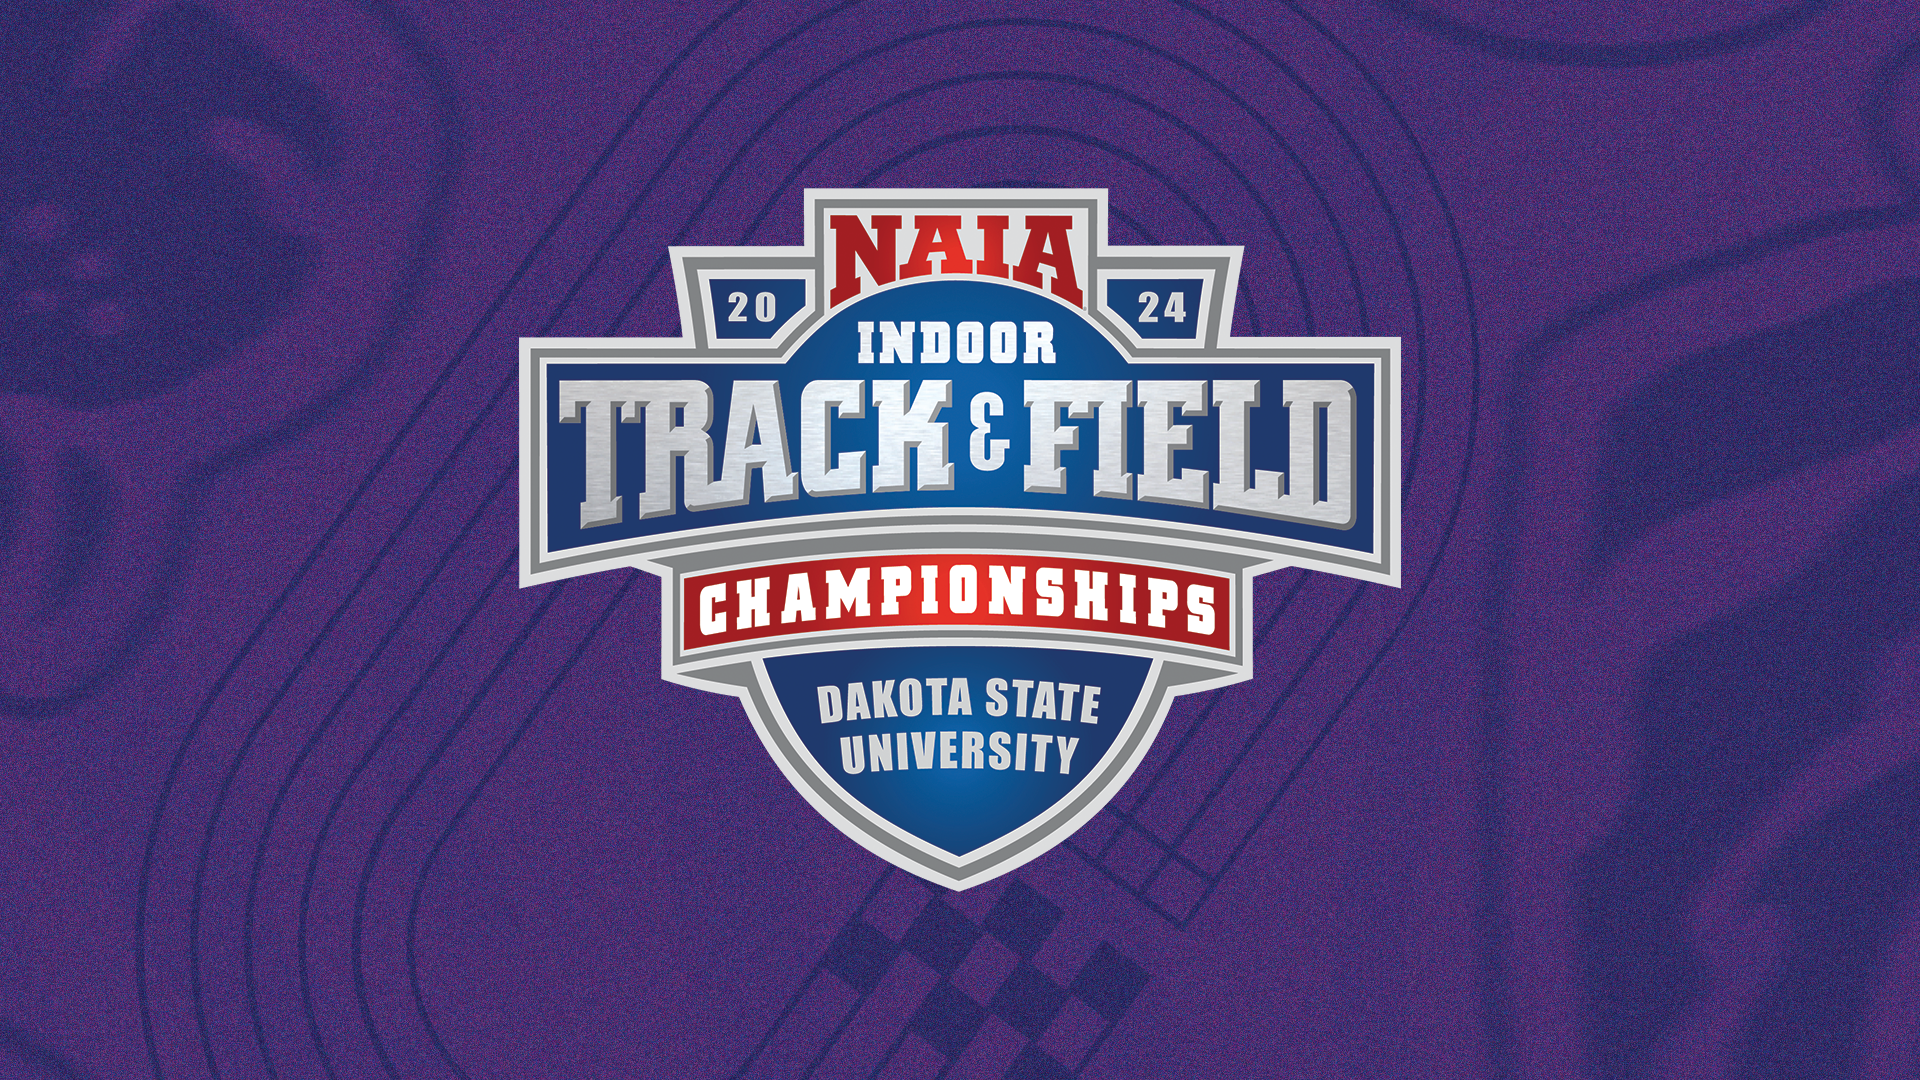 UPDATES FROM 2024 NAIA INDOOR TRACK & FIELD CHAMPIONSHIPS